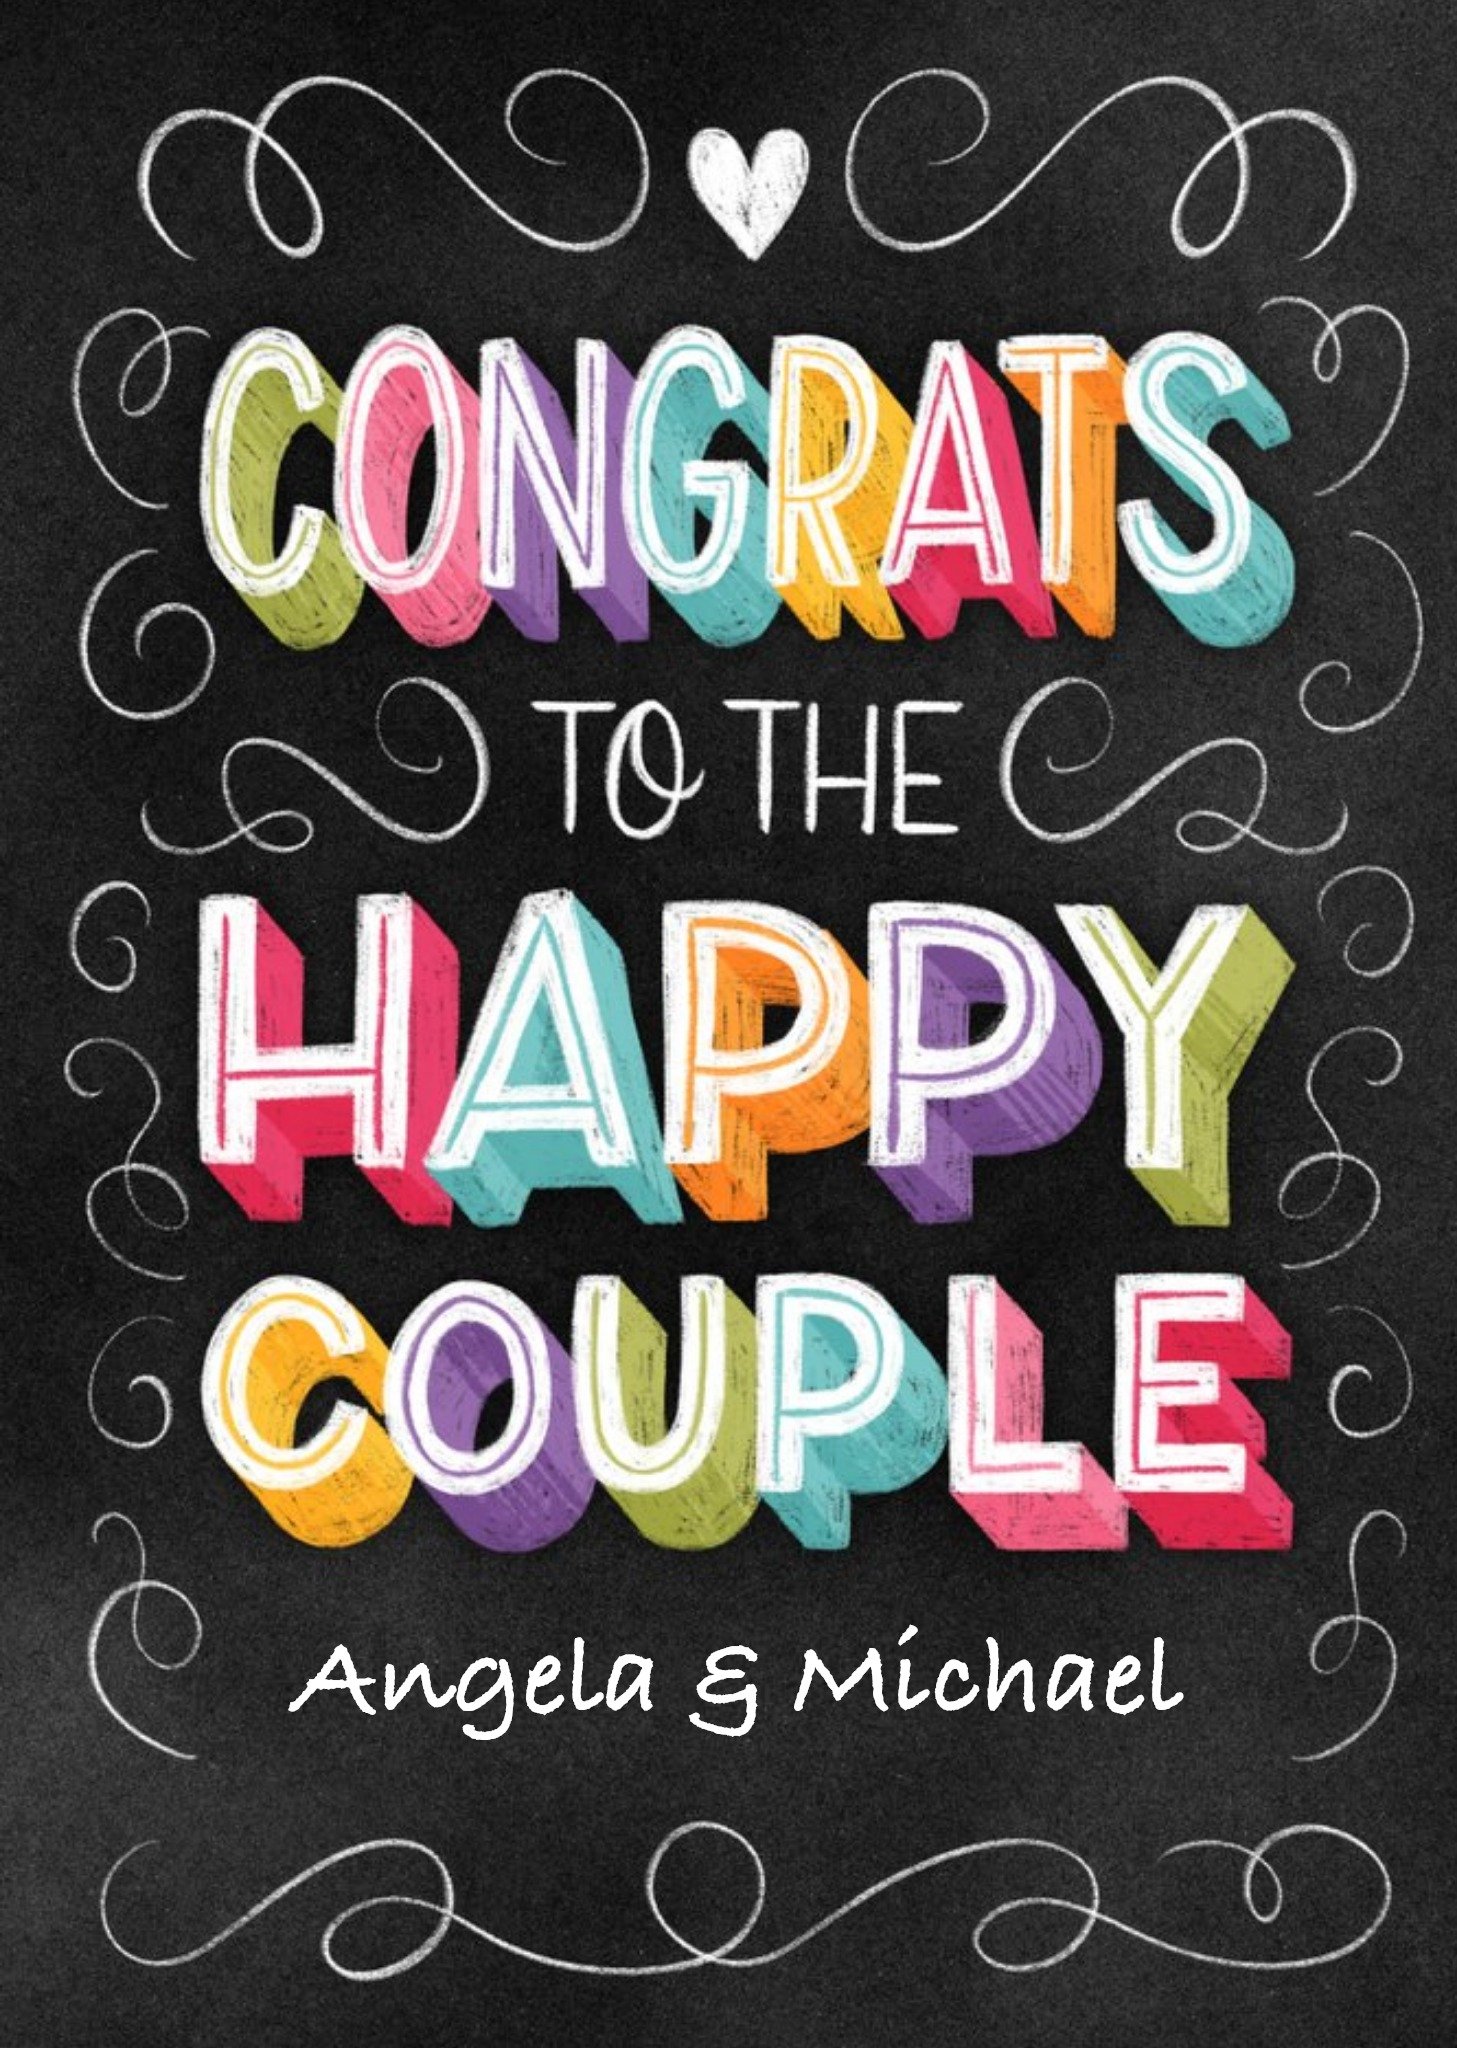 Moonpig Typographic Chalkboard Congrats To The Happy Couple Wedding Card, Large